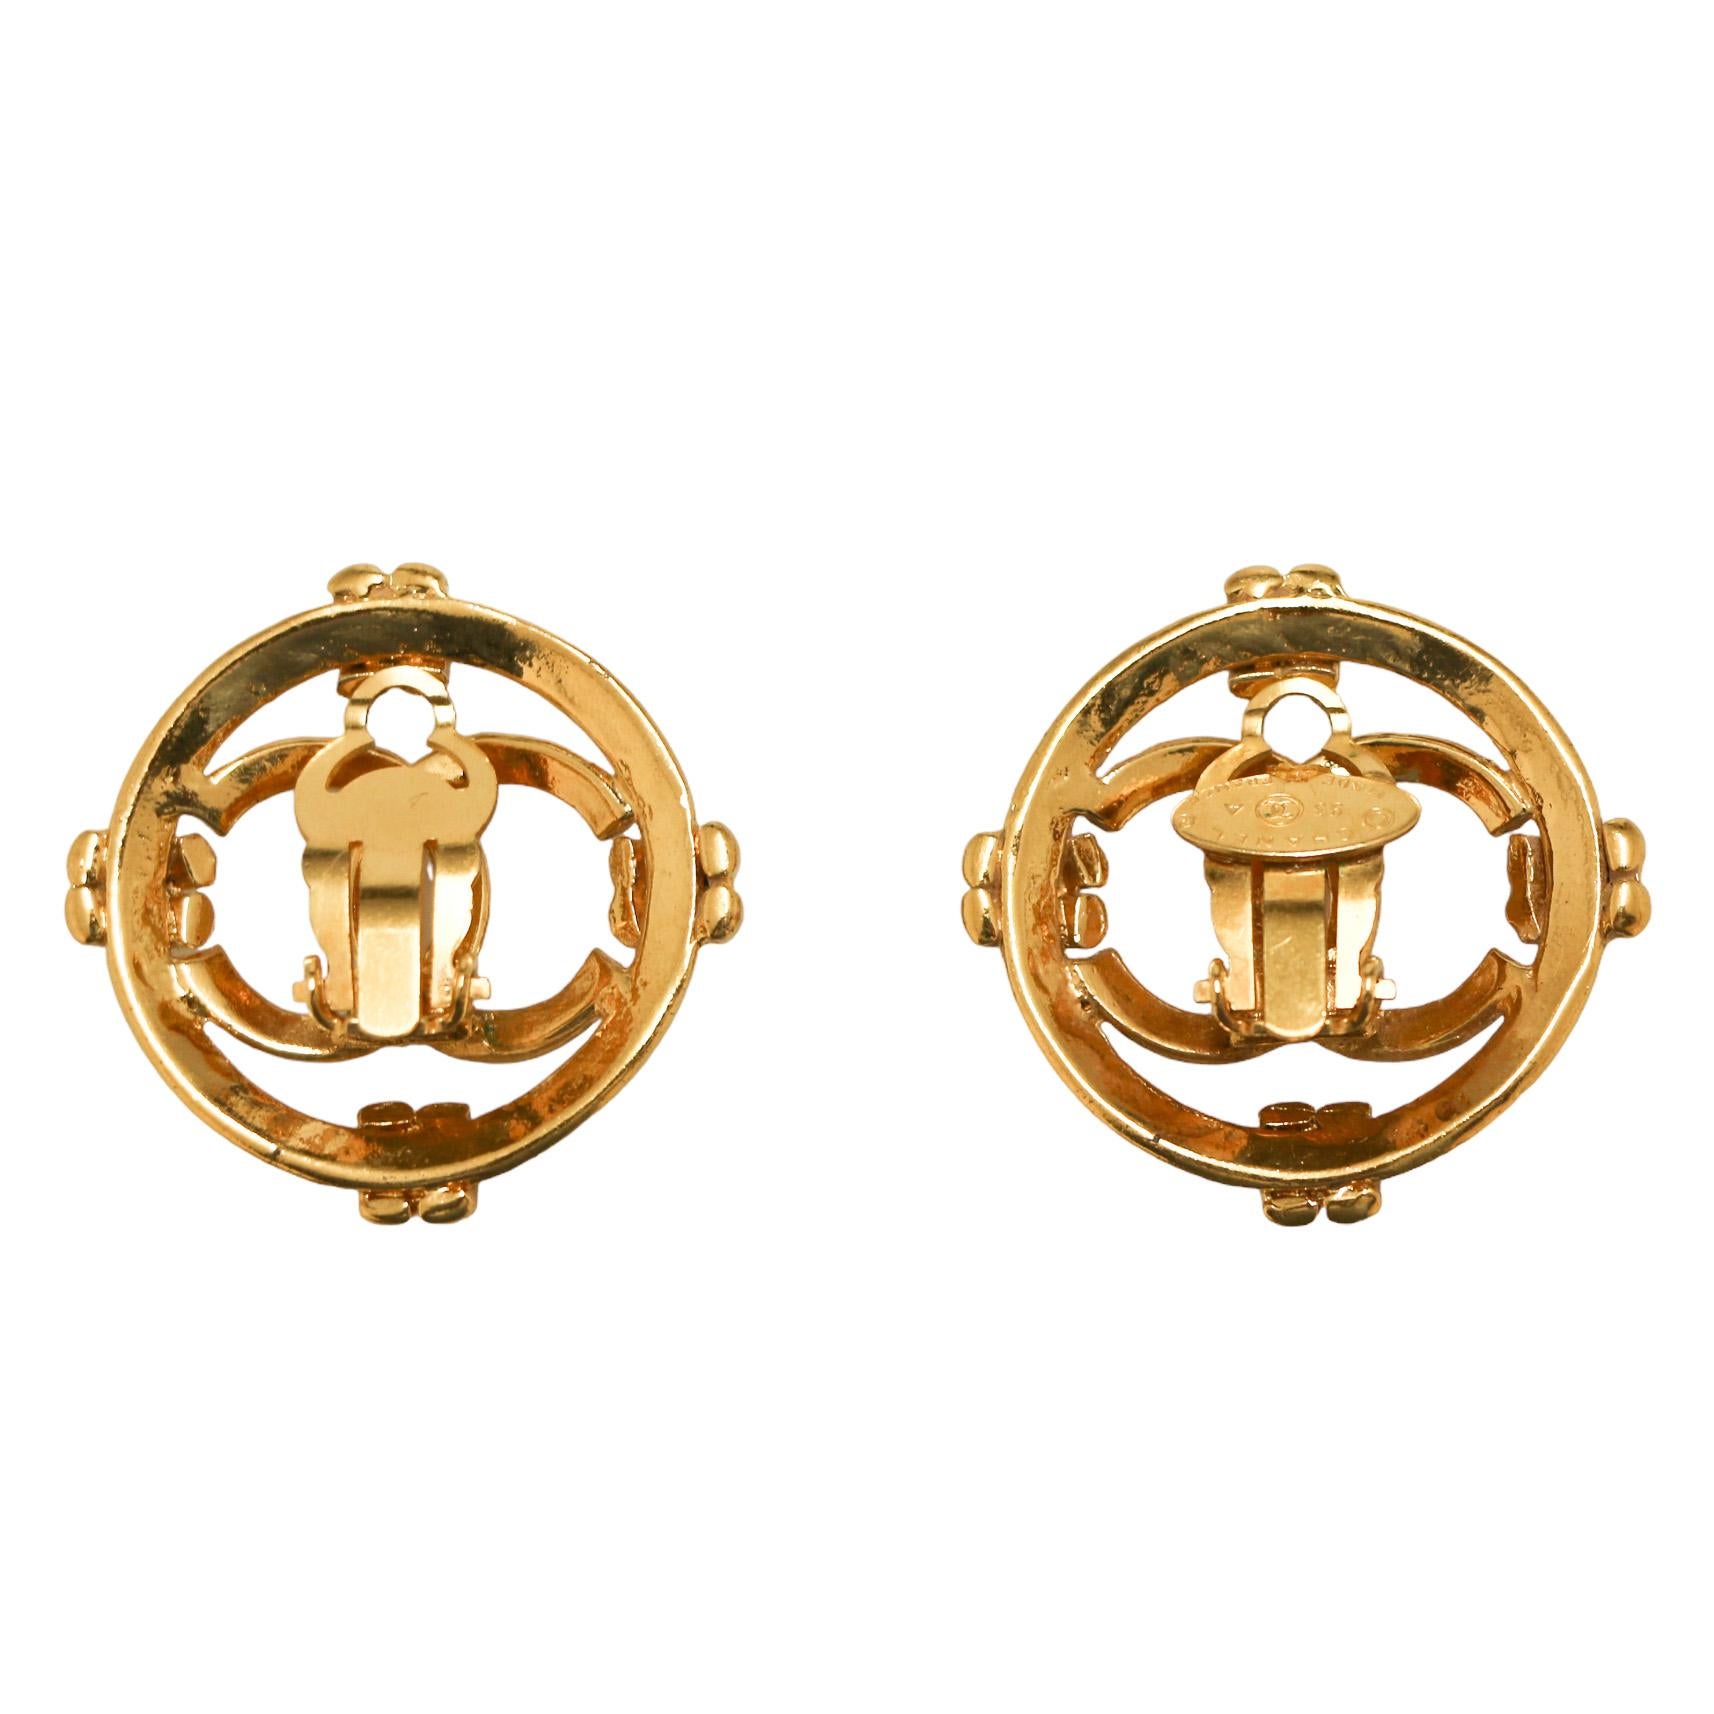 Pair of stunning vintage CC Chanel round clips.

Condition : very good
Made in France 
Materials : 24K gold plated metal
Color : gold
Dimensions : 3cm diameter
Hardware : gold
Stamp : yes
Year : autumn 1993